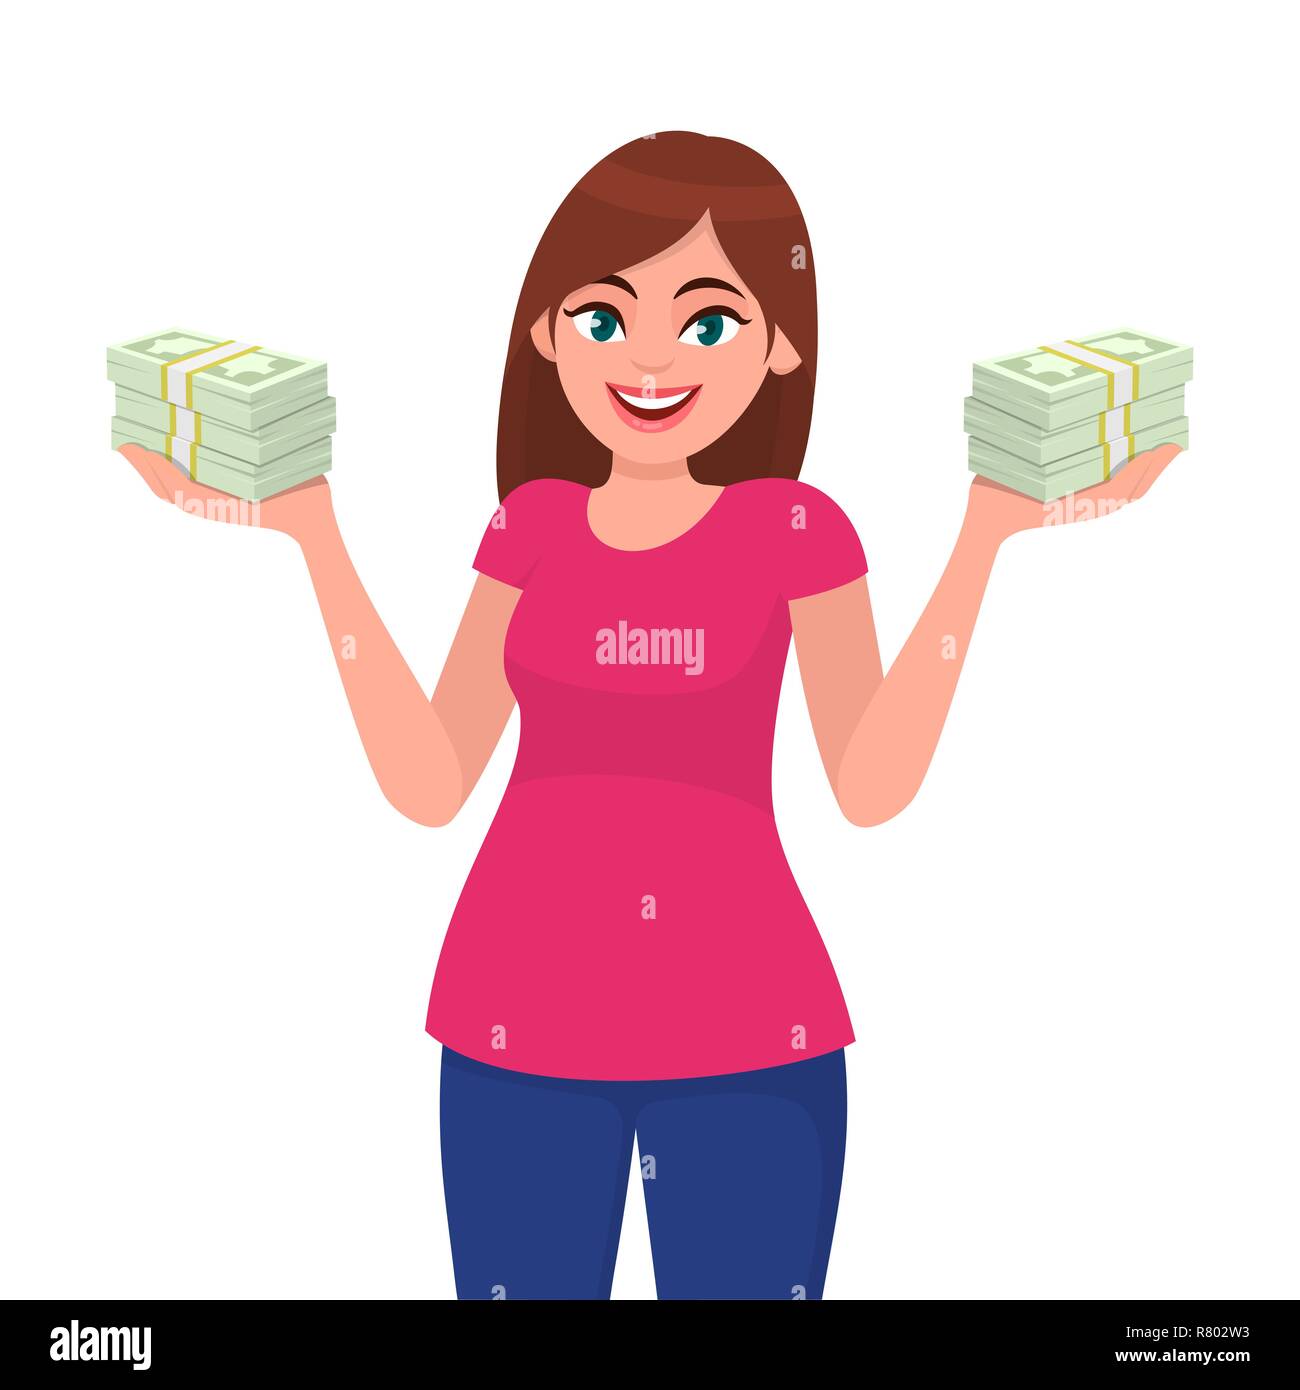 Successful happy young business woman holding cash / money / currency / banknote bundle in hands. Business and finance concept illustration in vector Stock Vector